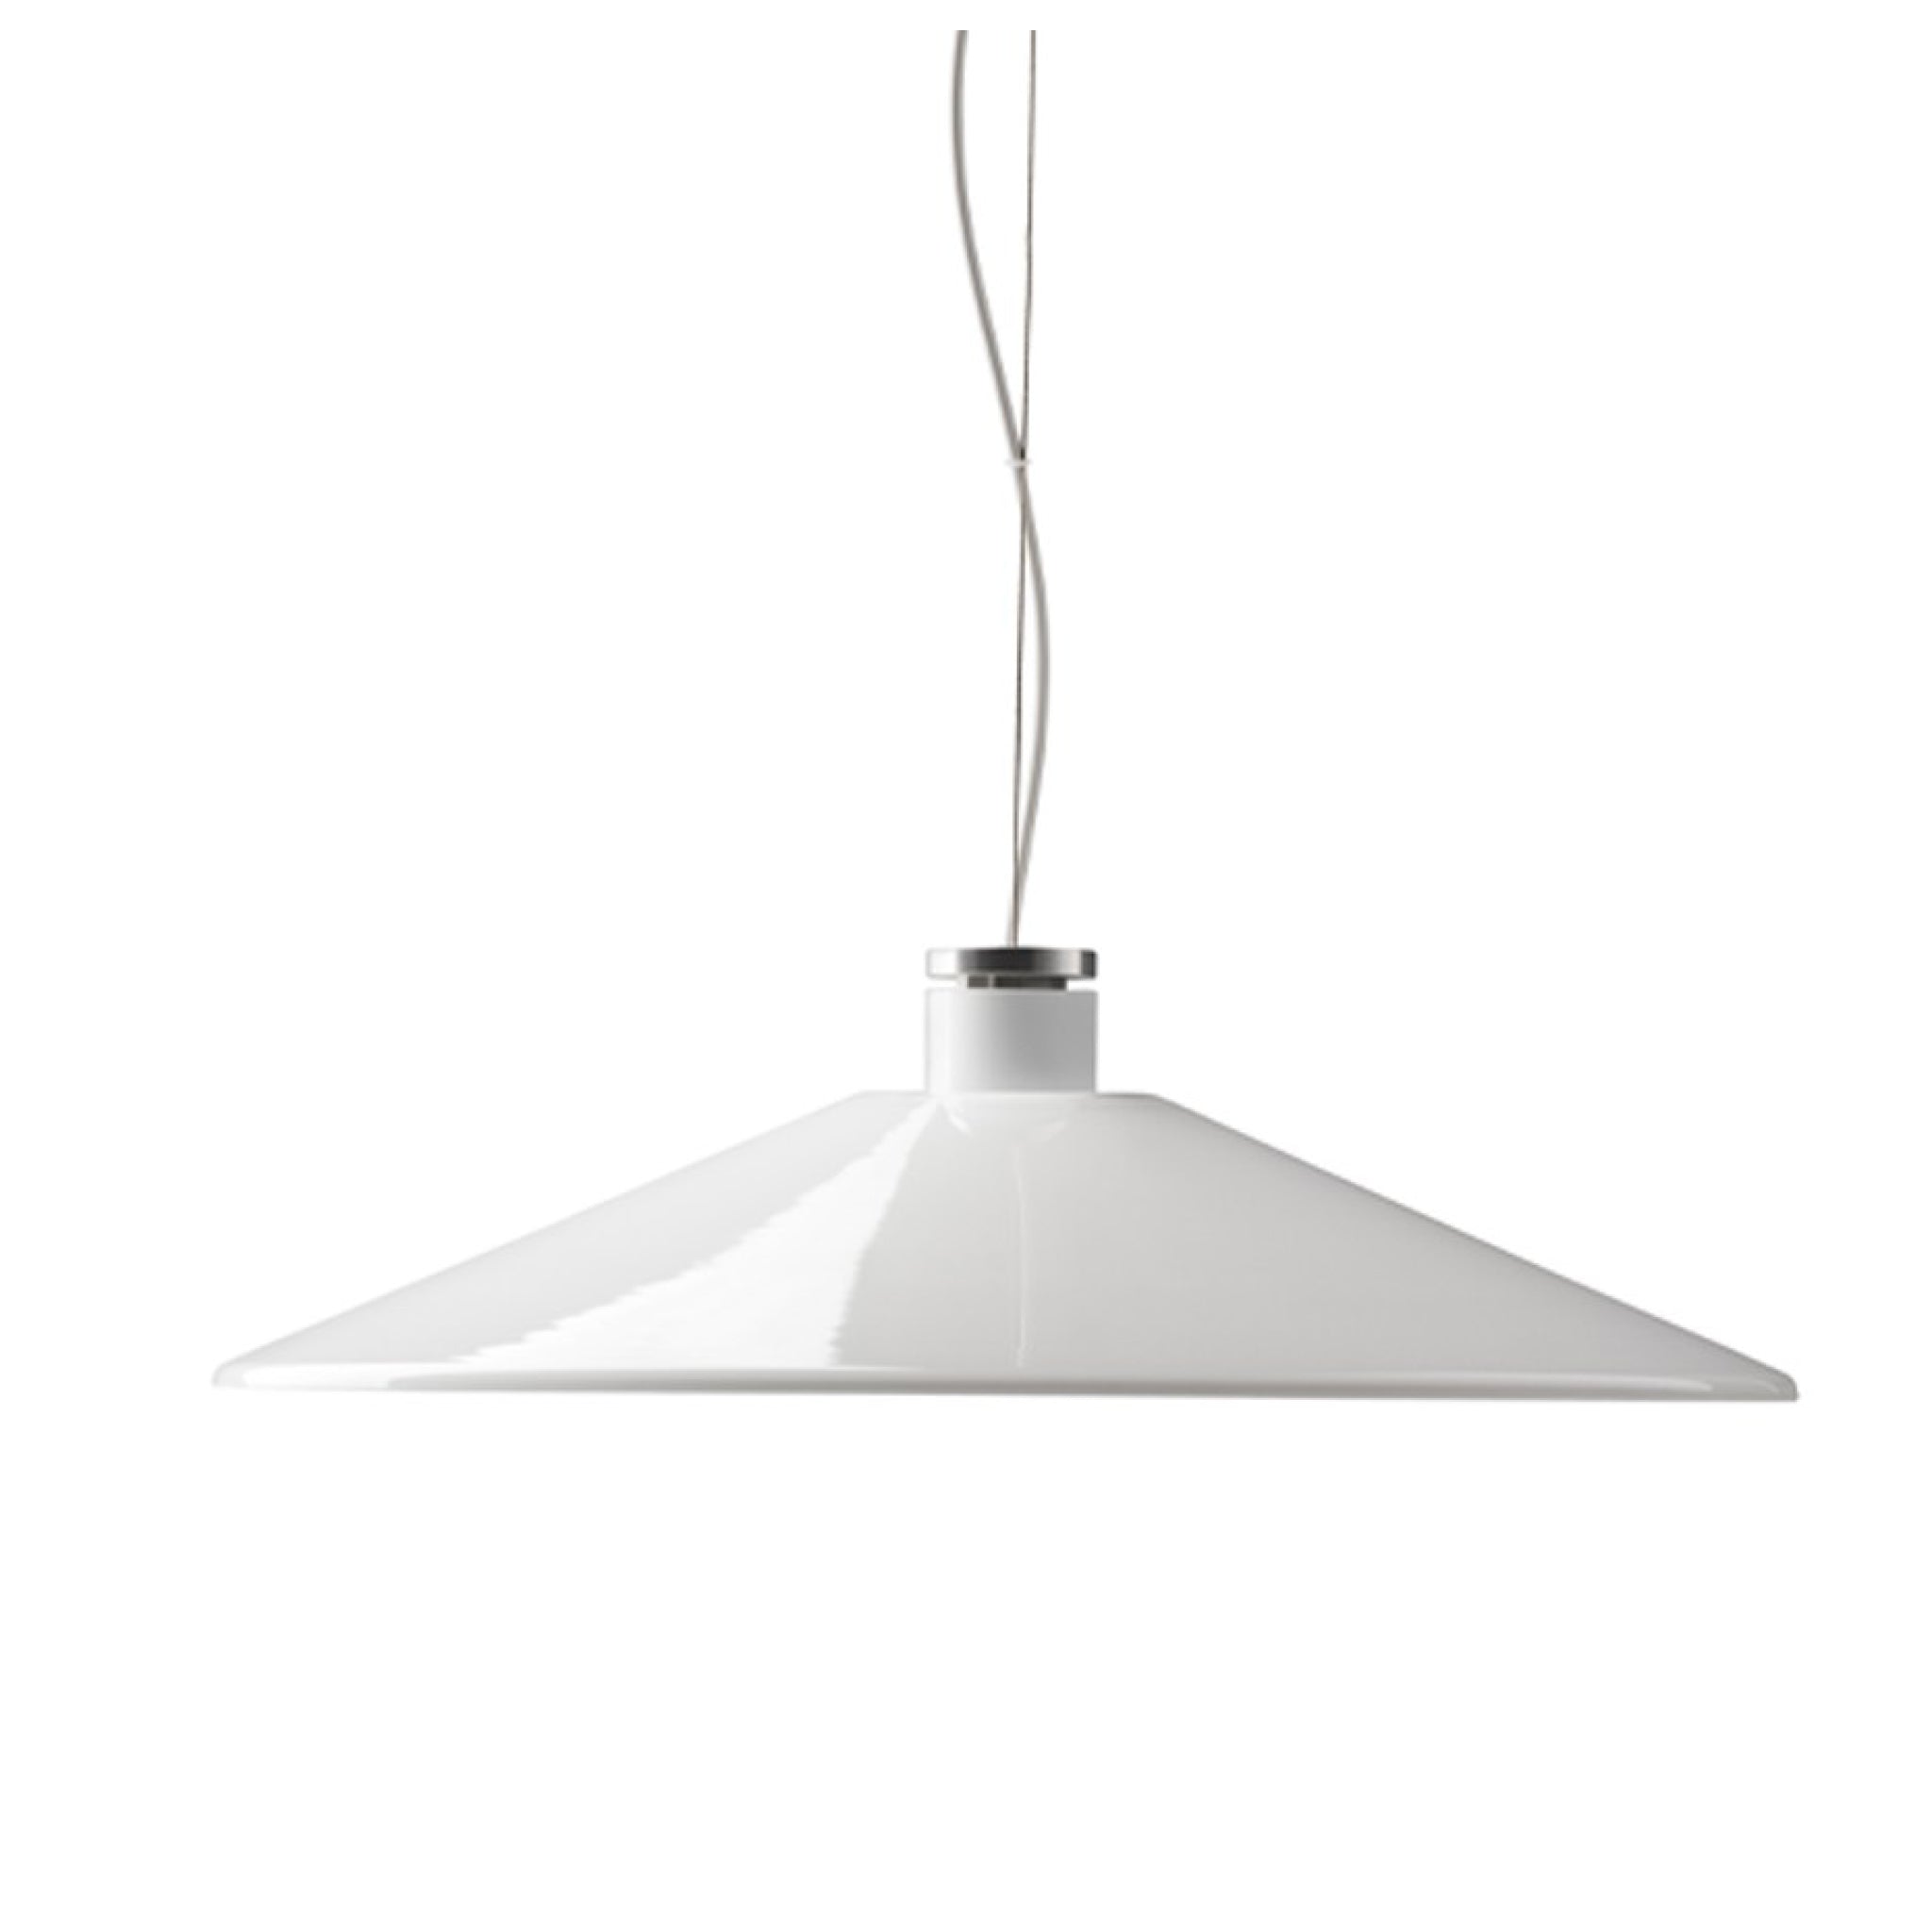 w202 s4 Halo Pendant by Wastberg